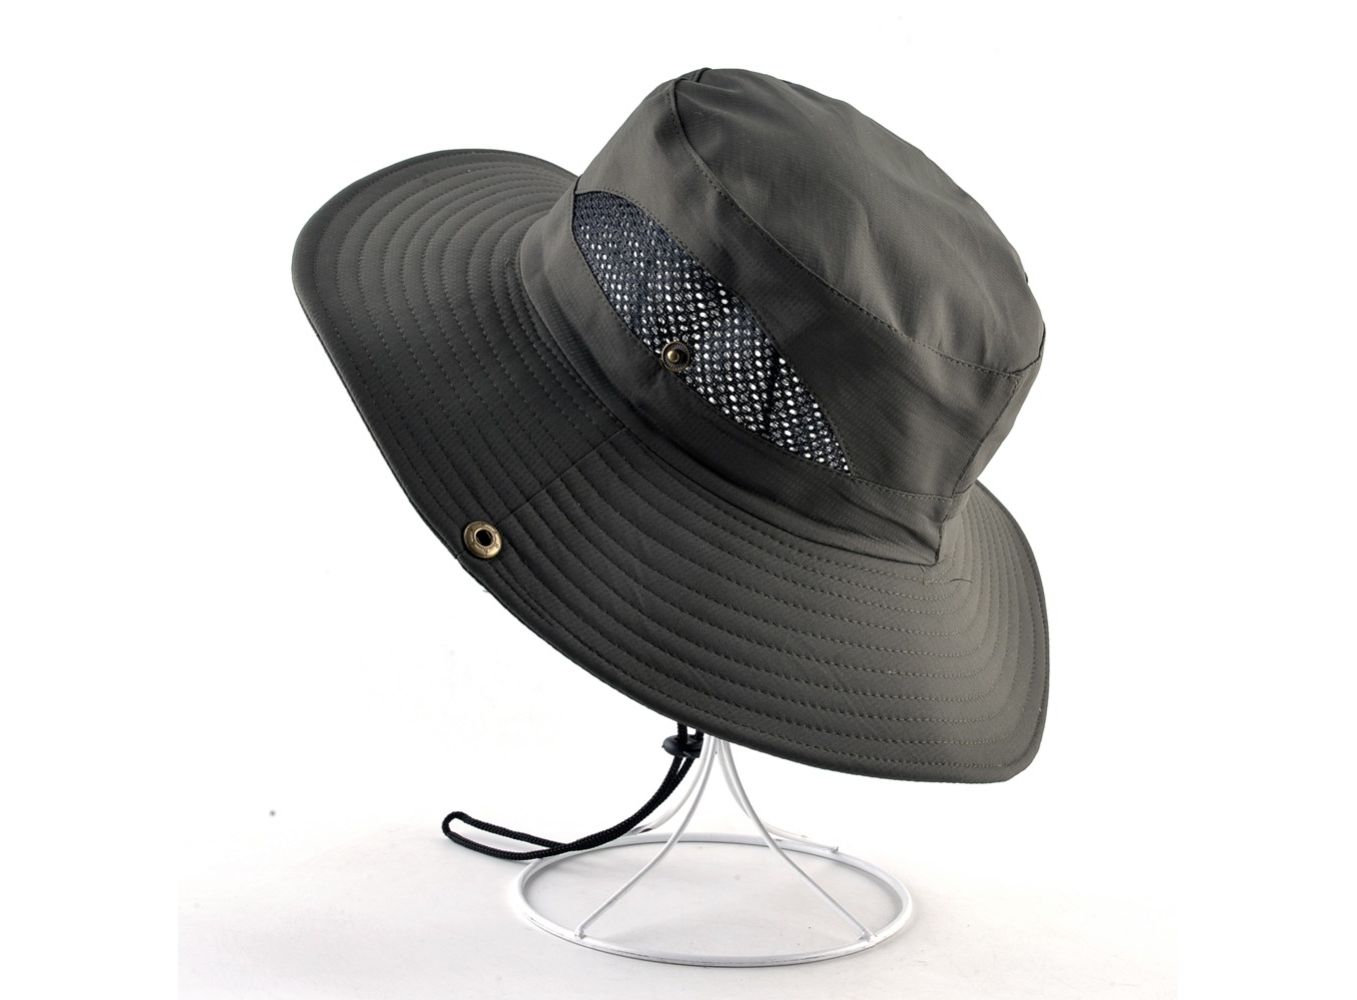 Solid Color Sun Hats For Men Outdoor Fishing Cap